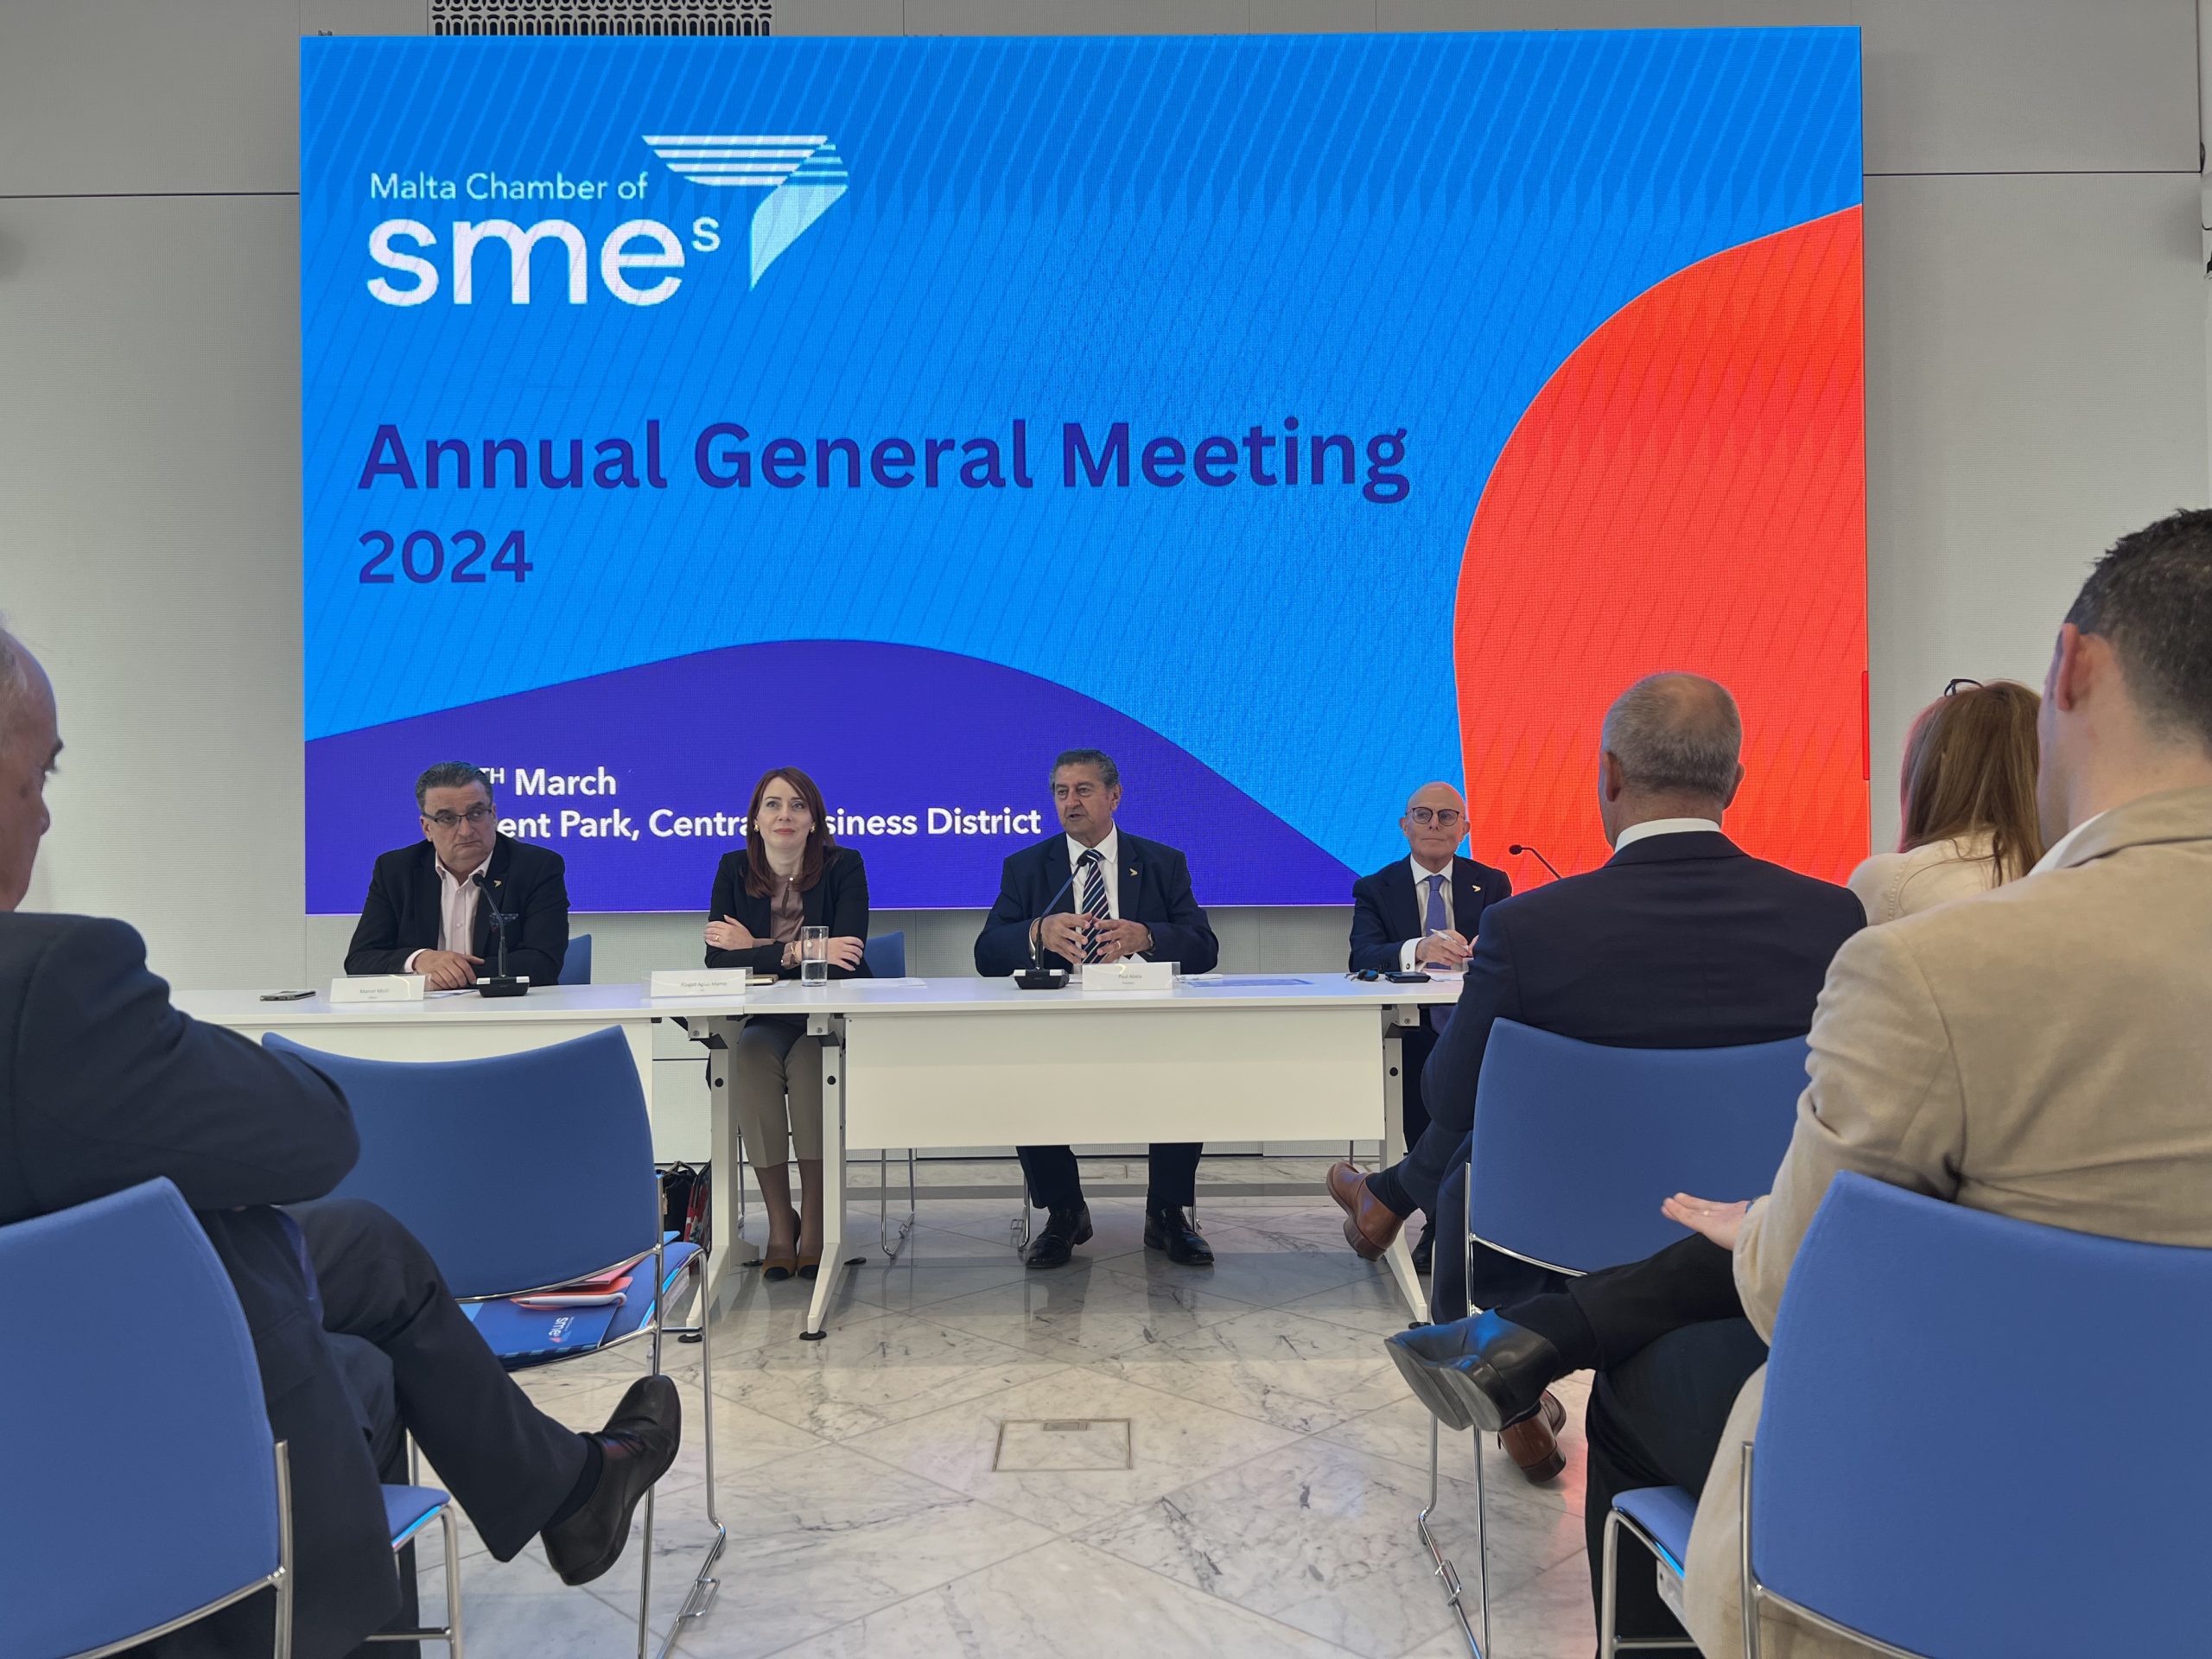 Malta Chamber of SMEs holds its 75th Annual General Meeting